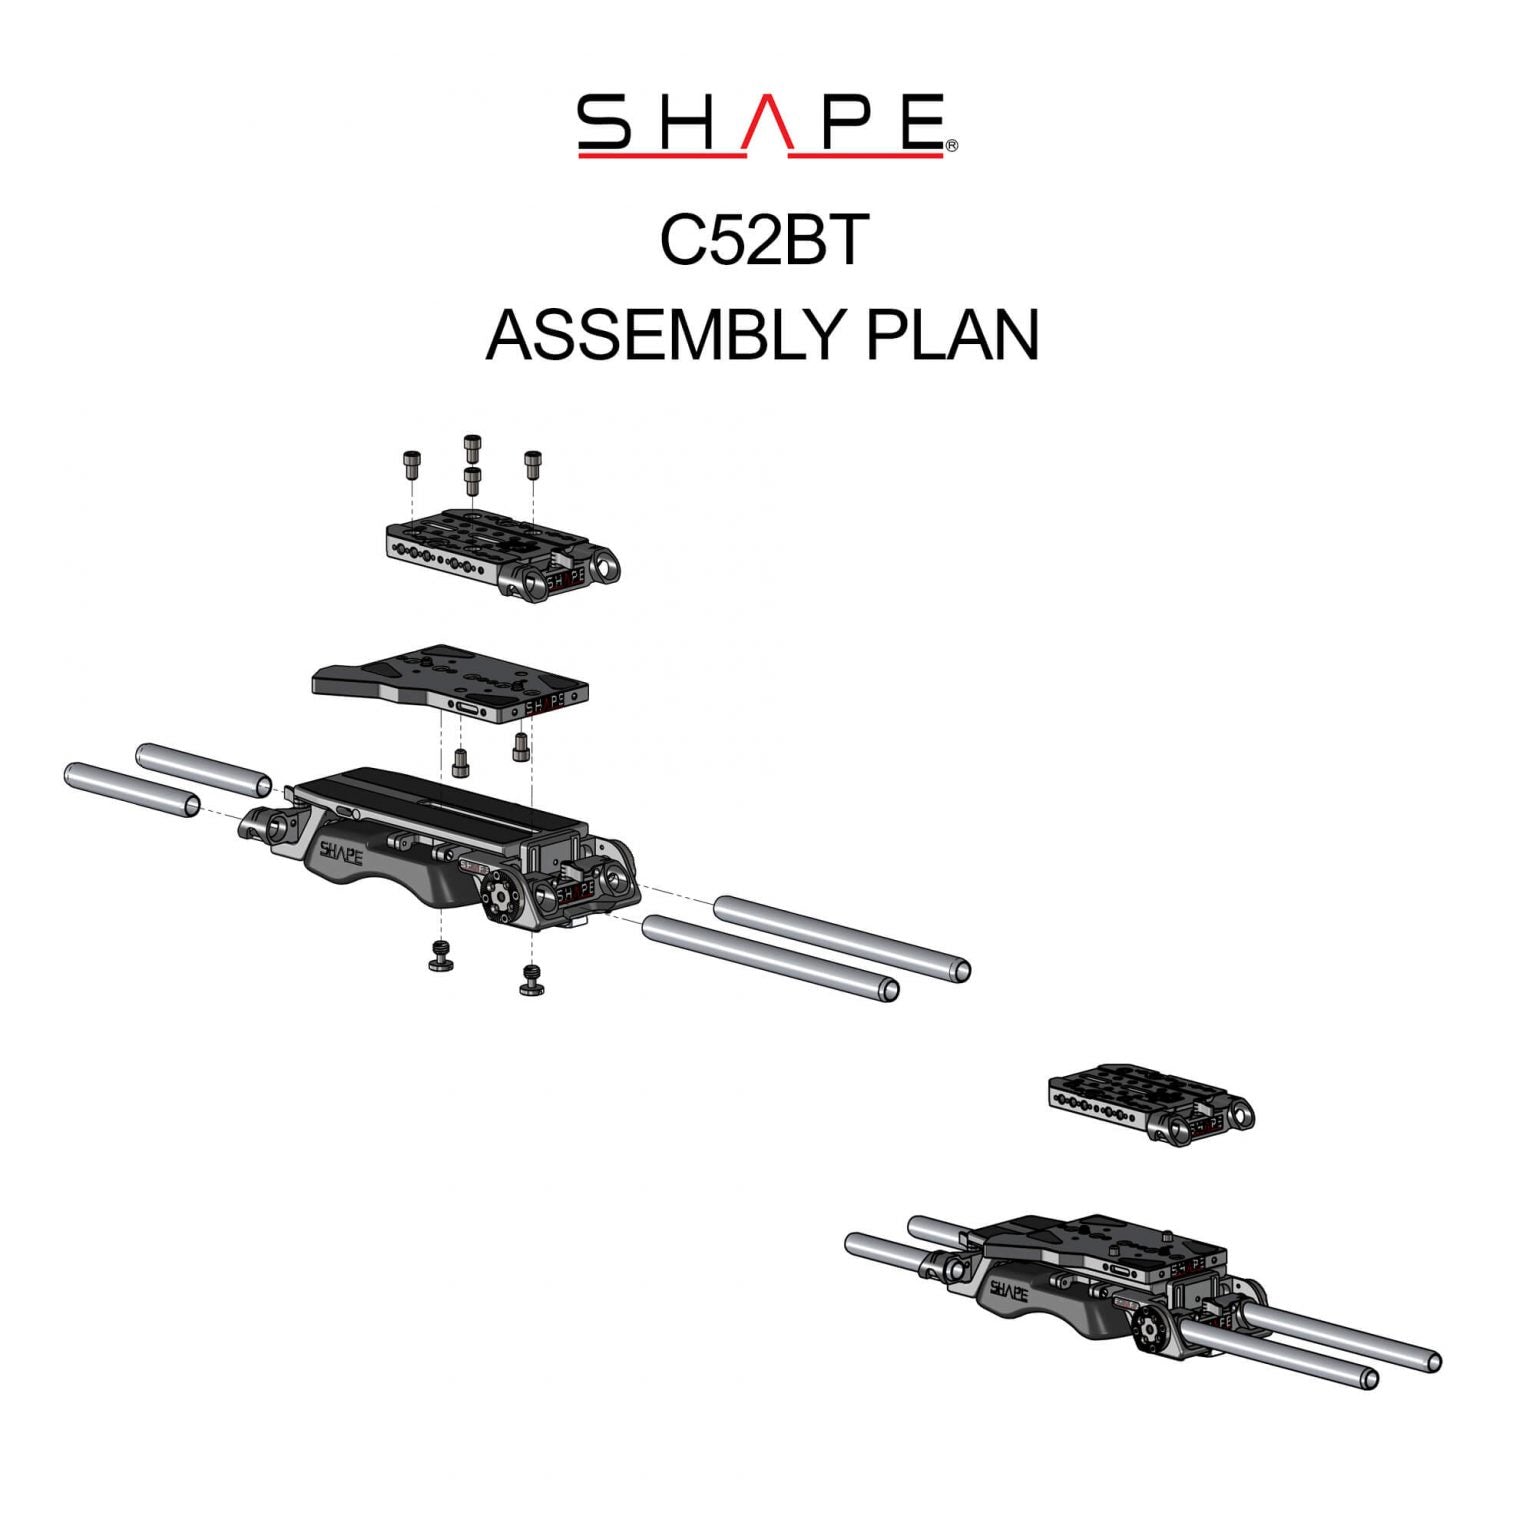 SHAPE Top Plate, Baseplate and Handle for Canon C500 MKII/C300 MKIII - SHAPE wlb